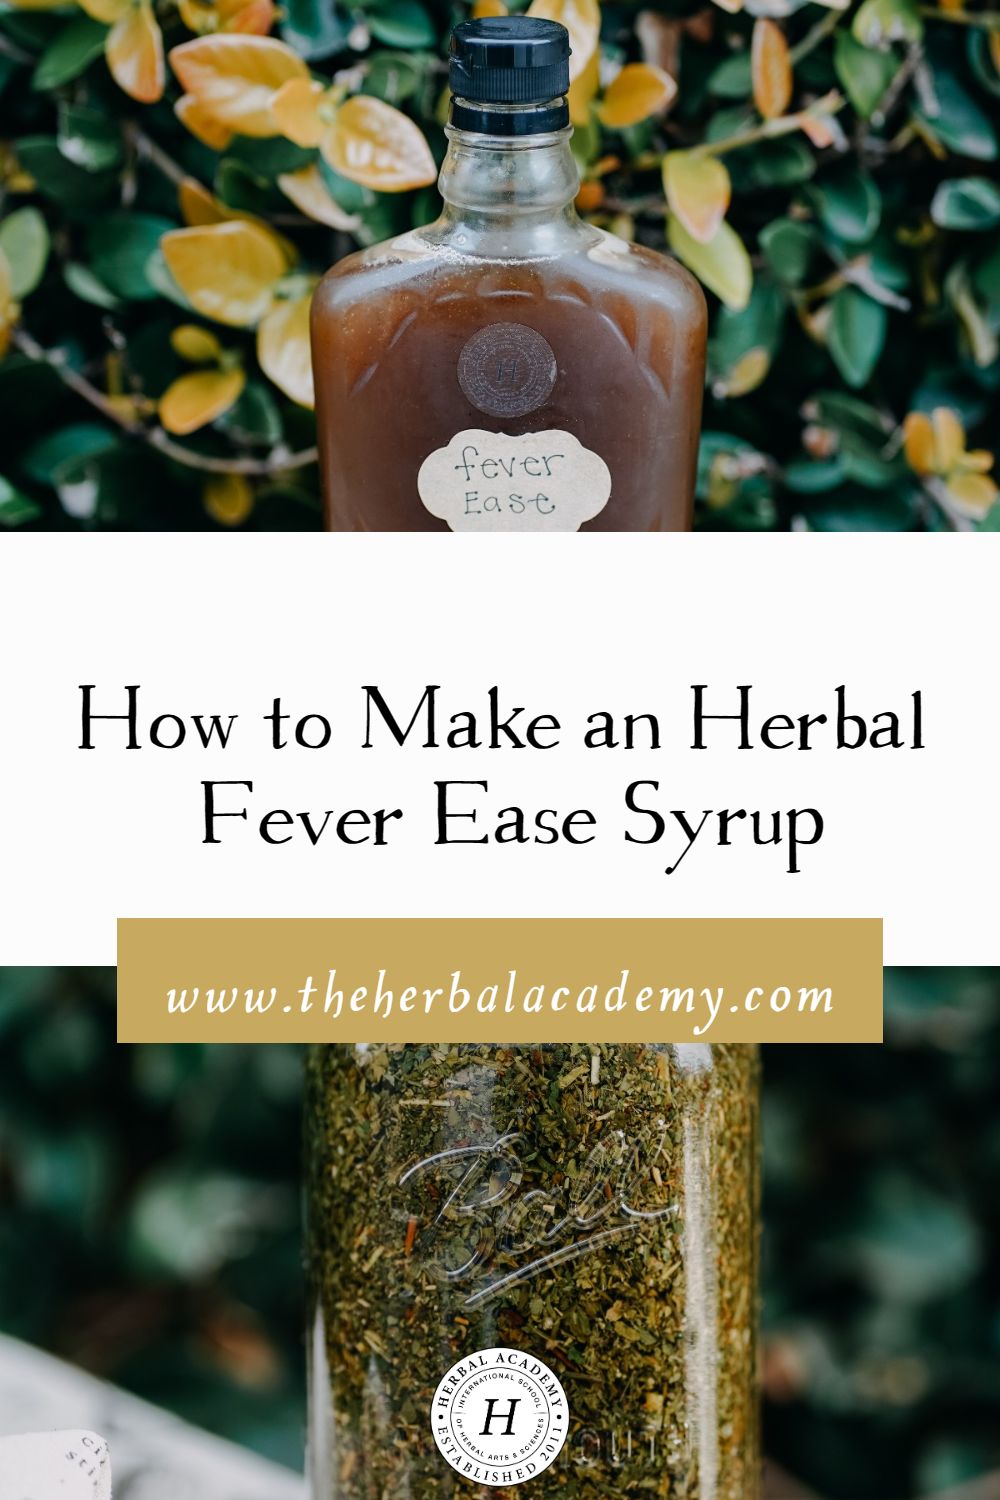 How to Make an Herbal Fever Ease Formula | Herbal Academy | This Herbal Fever Ease Formula is a gentle and natural way to support fevers, is safe for most children, and helps the body cool down.